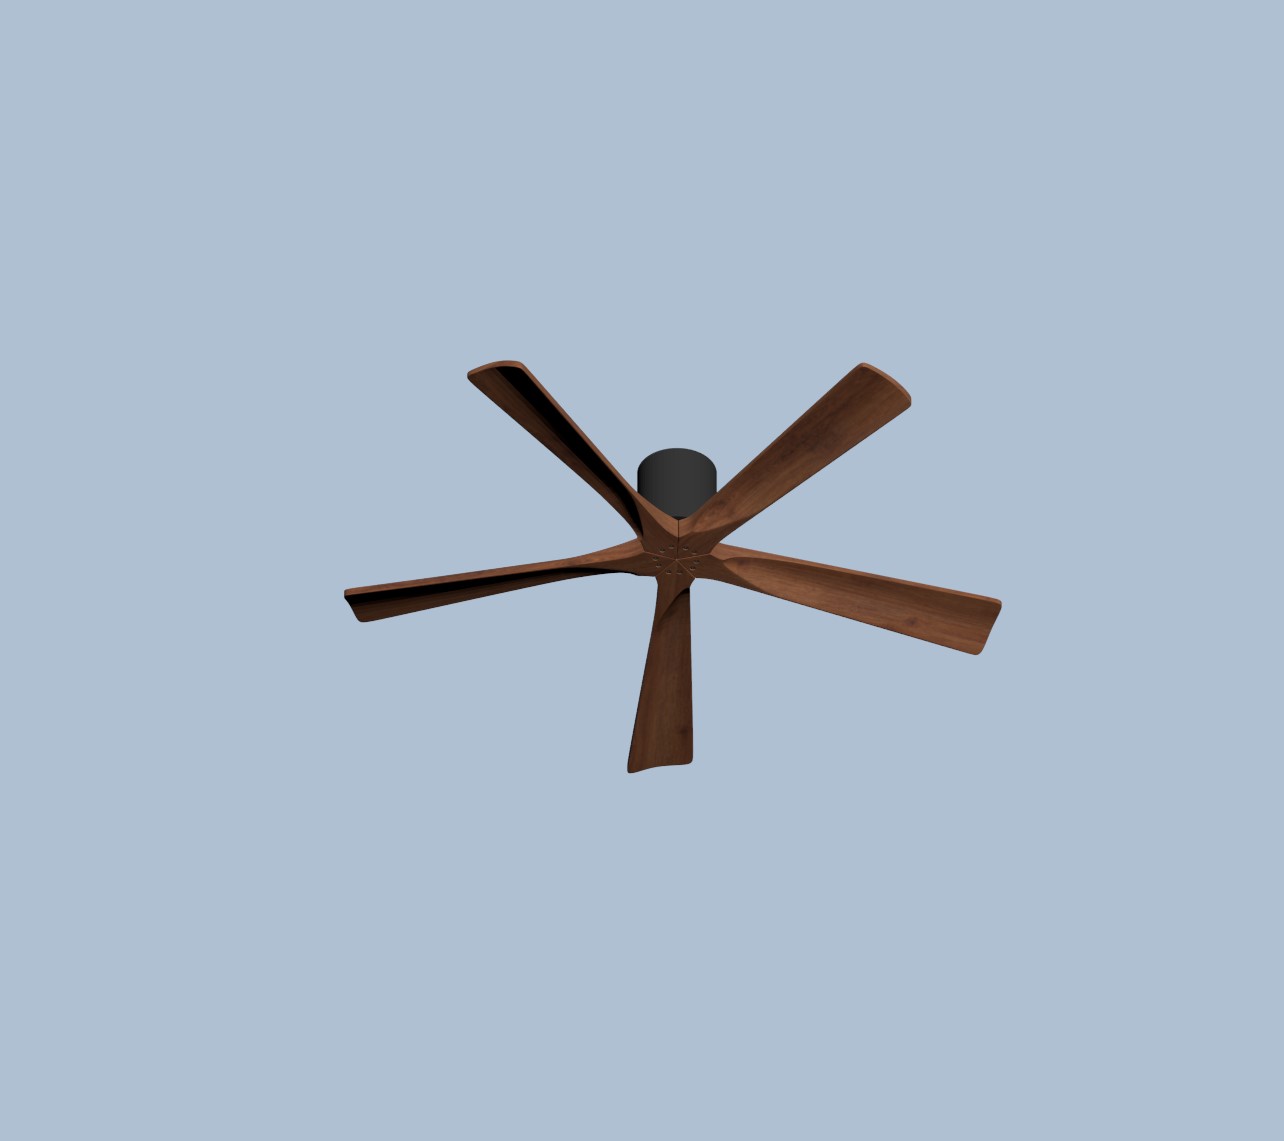 9784. 3D Ceiling Fans Model For Free Download by An Ngoc